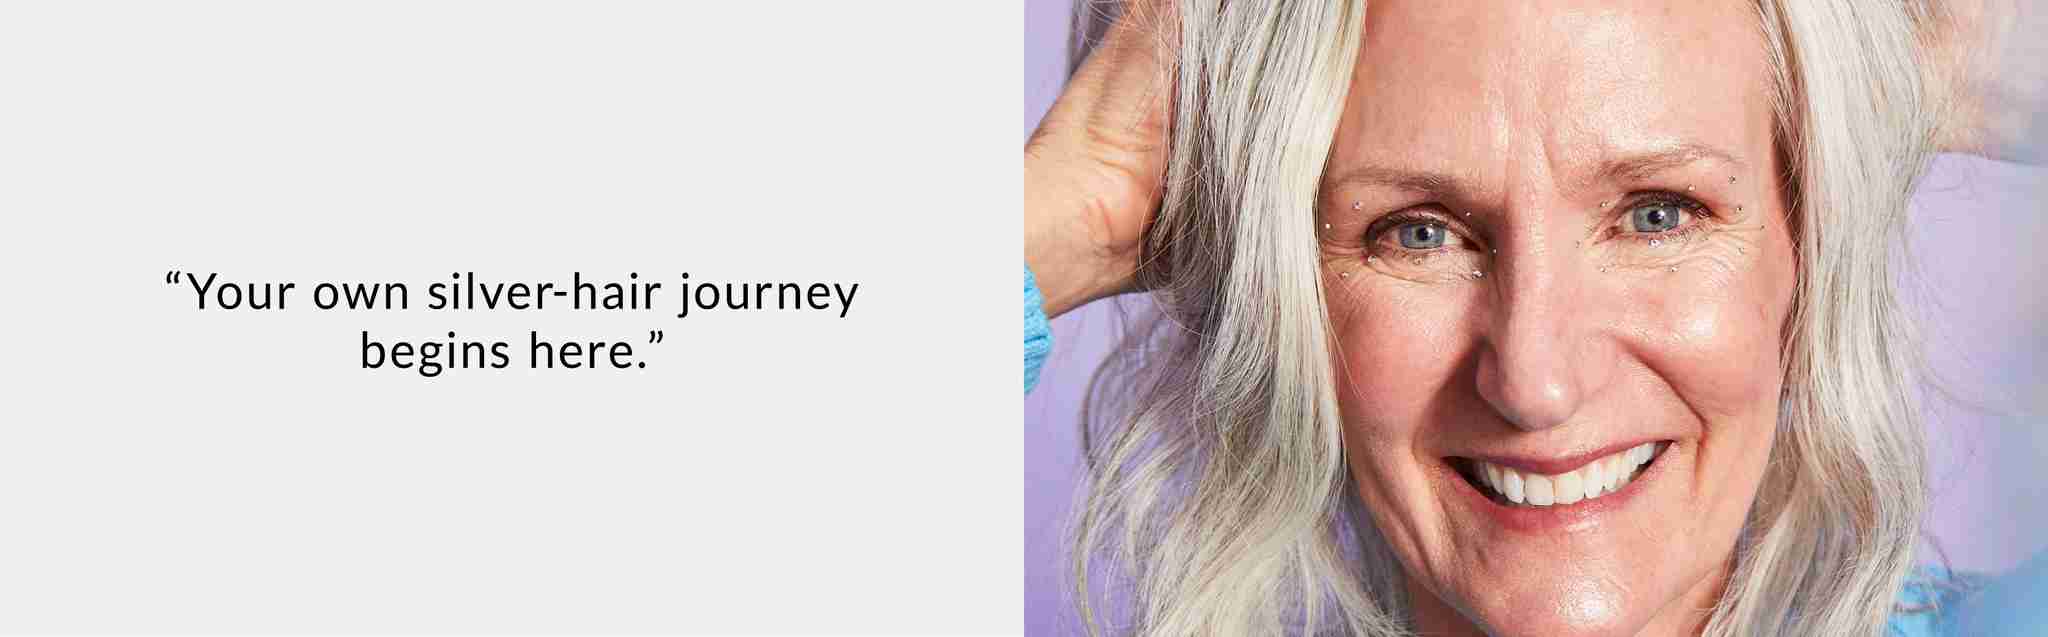 Your own silver hair journey begins here.